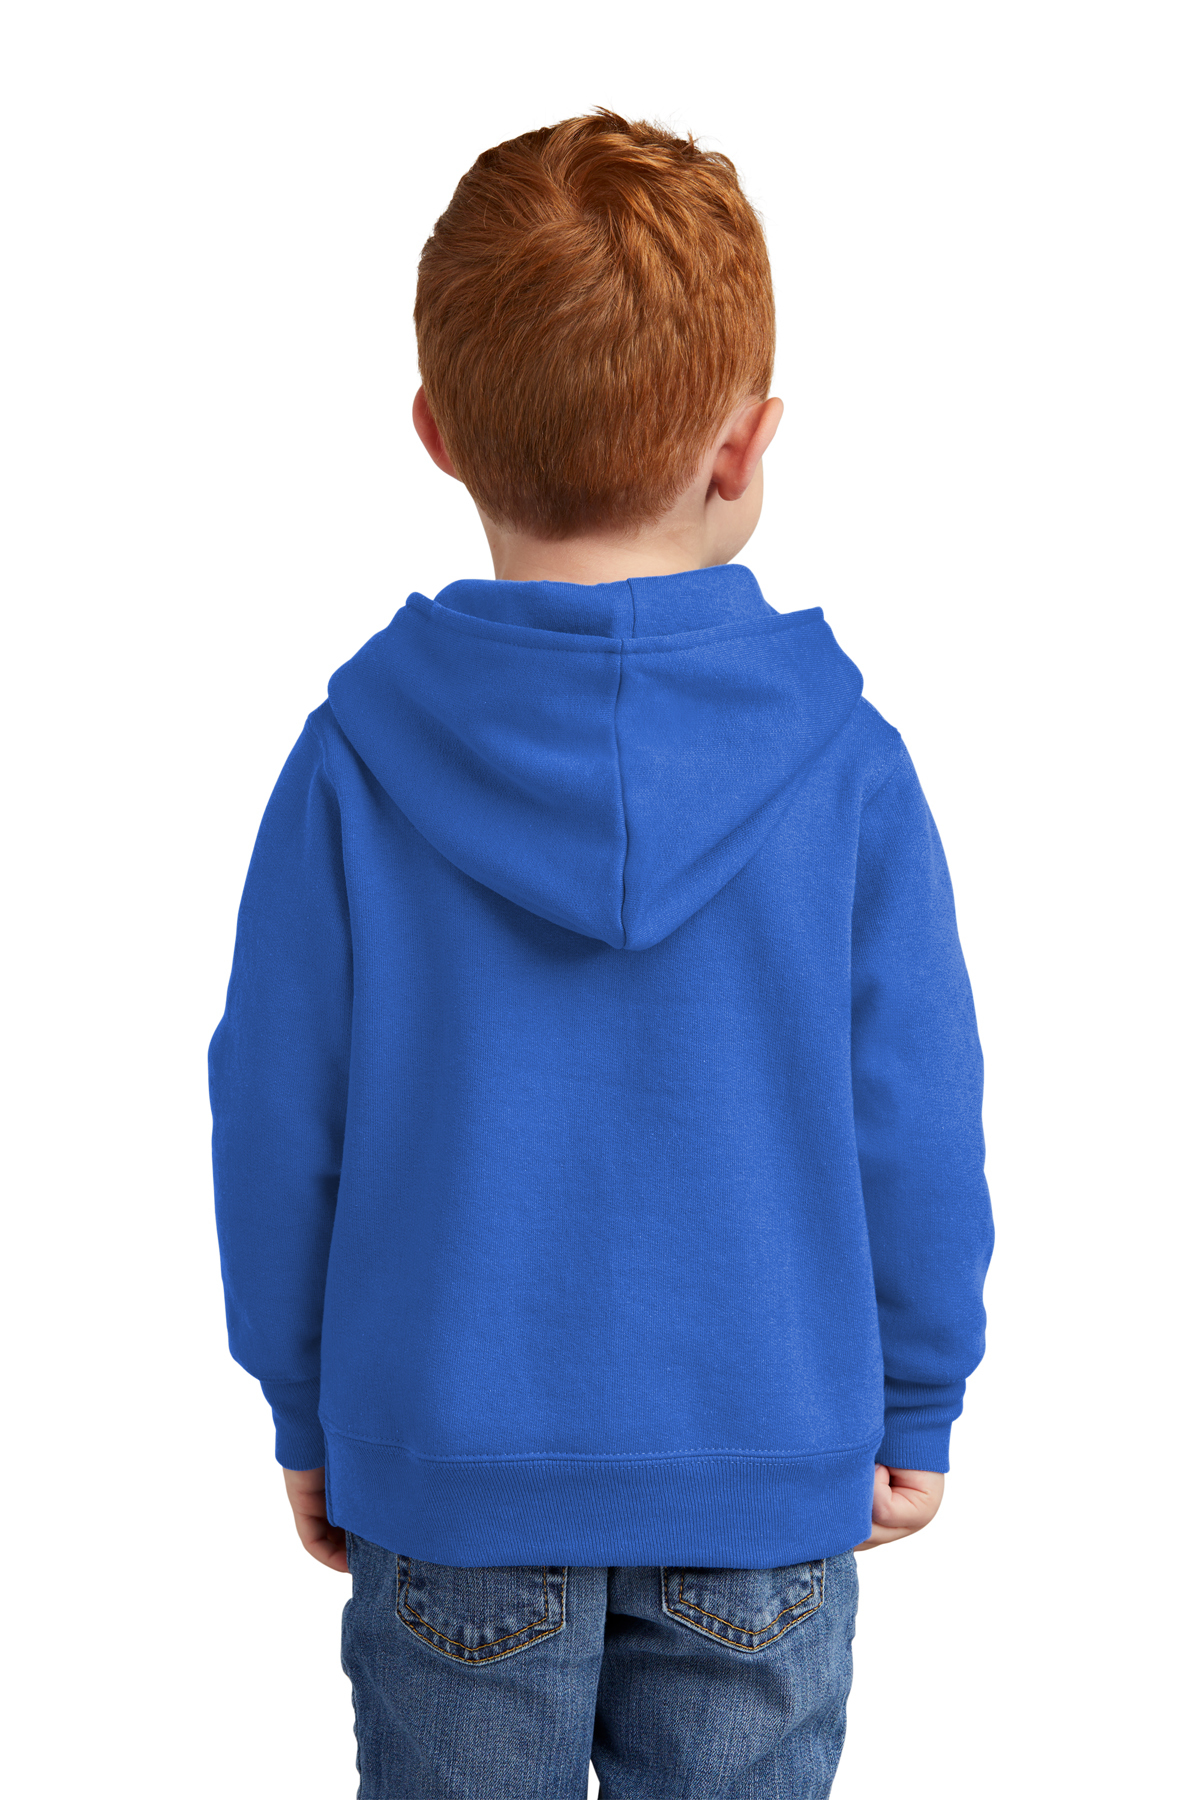 Port & Company Toddler Core Fleece Pullover Hooded Sweatshirt | Product |  Port & Company